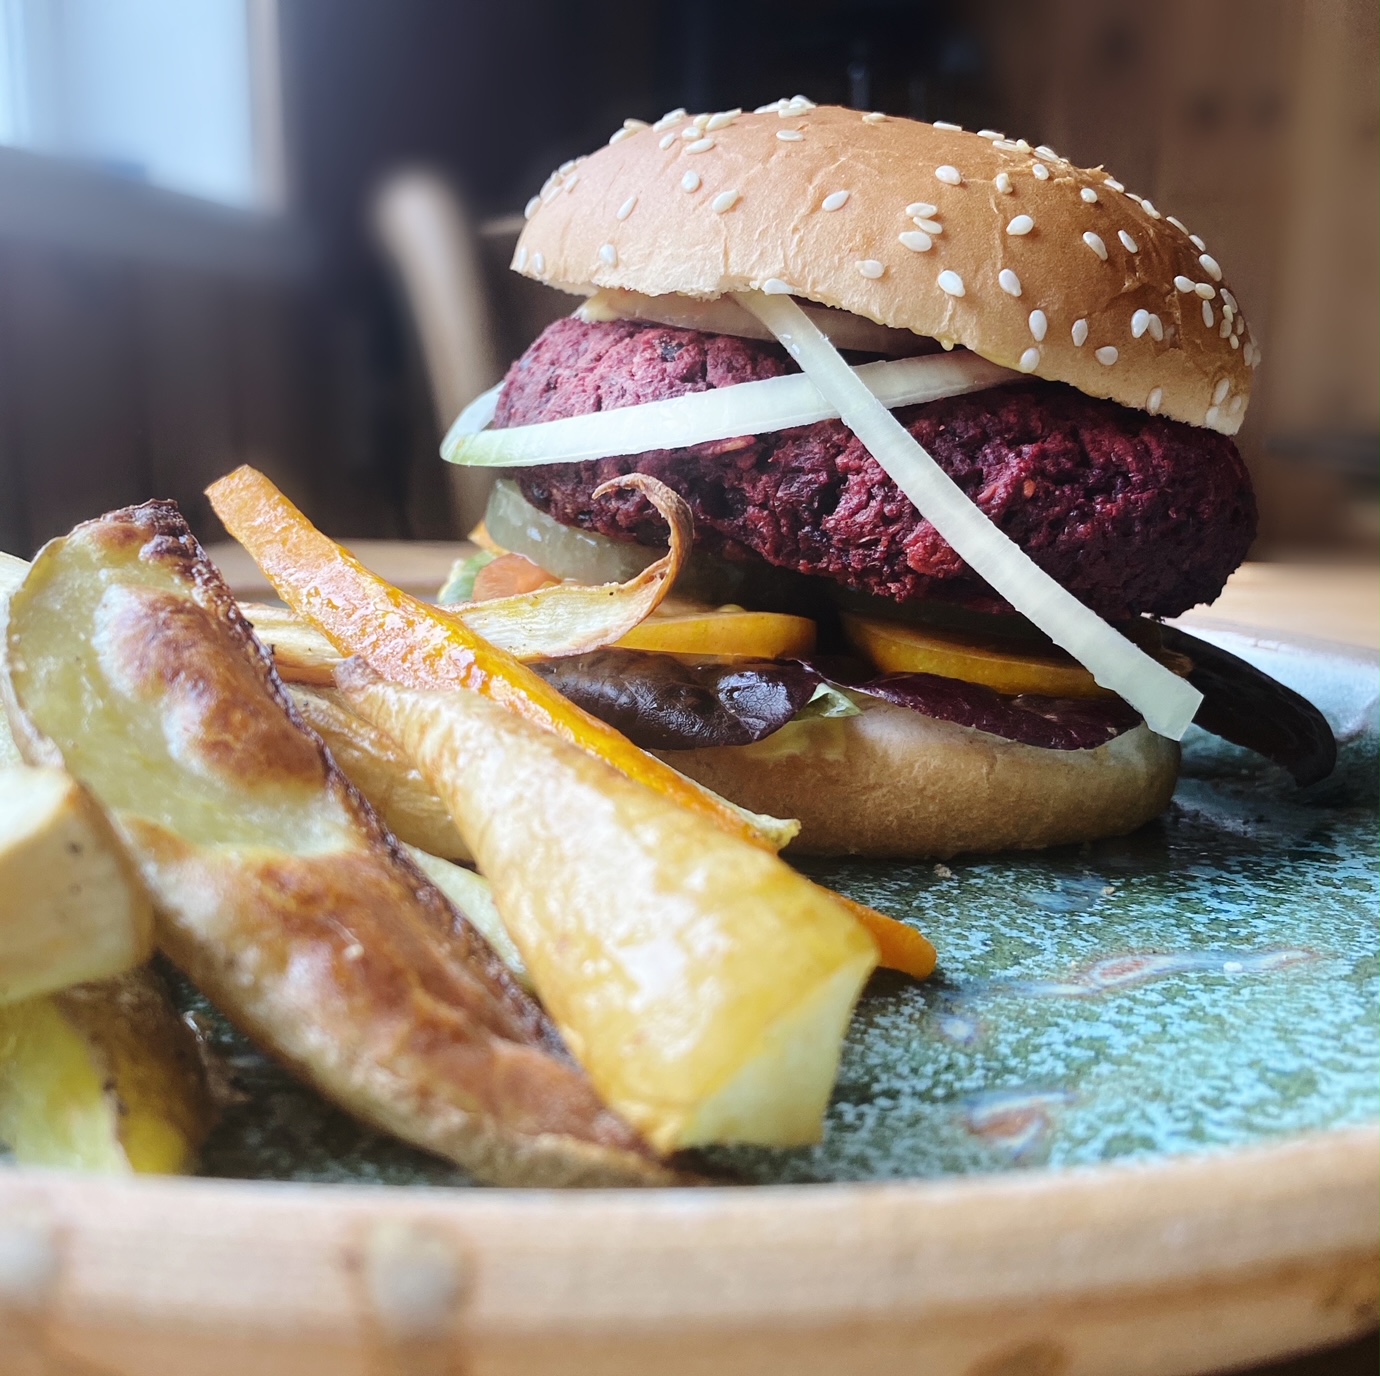 Beetroot & Black Bean Burgers with root veg chips